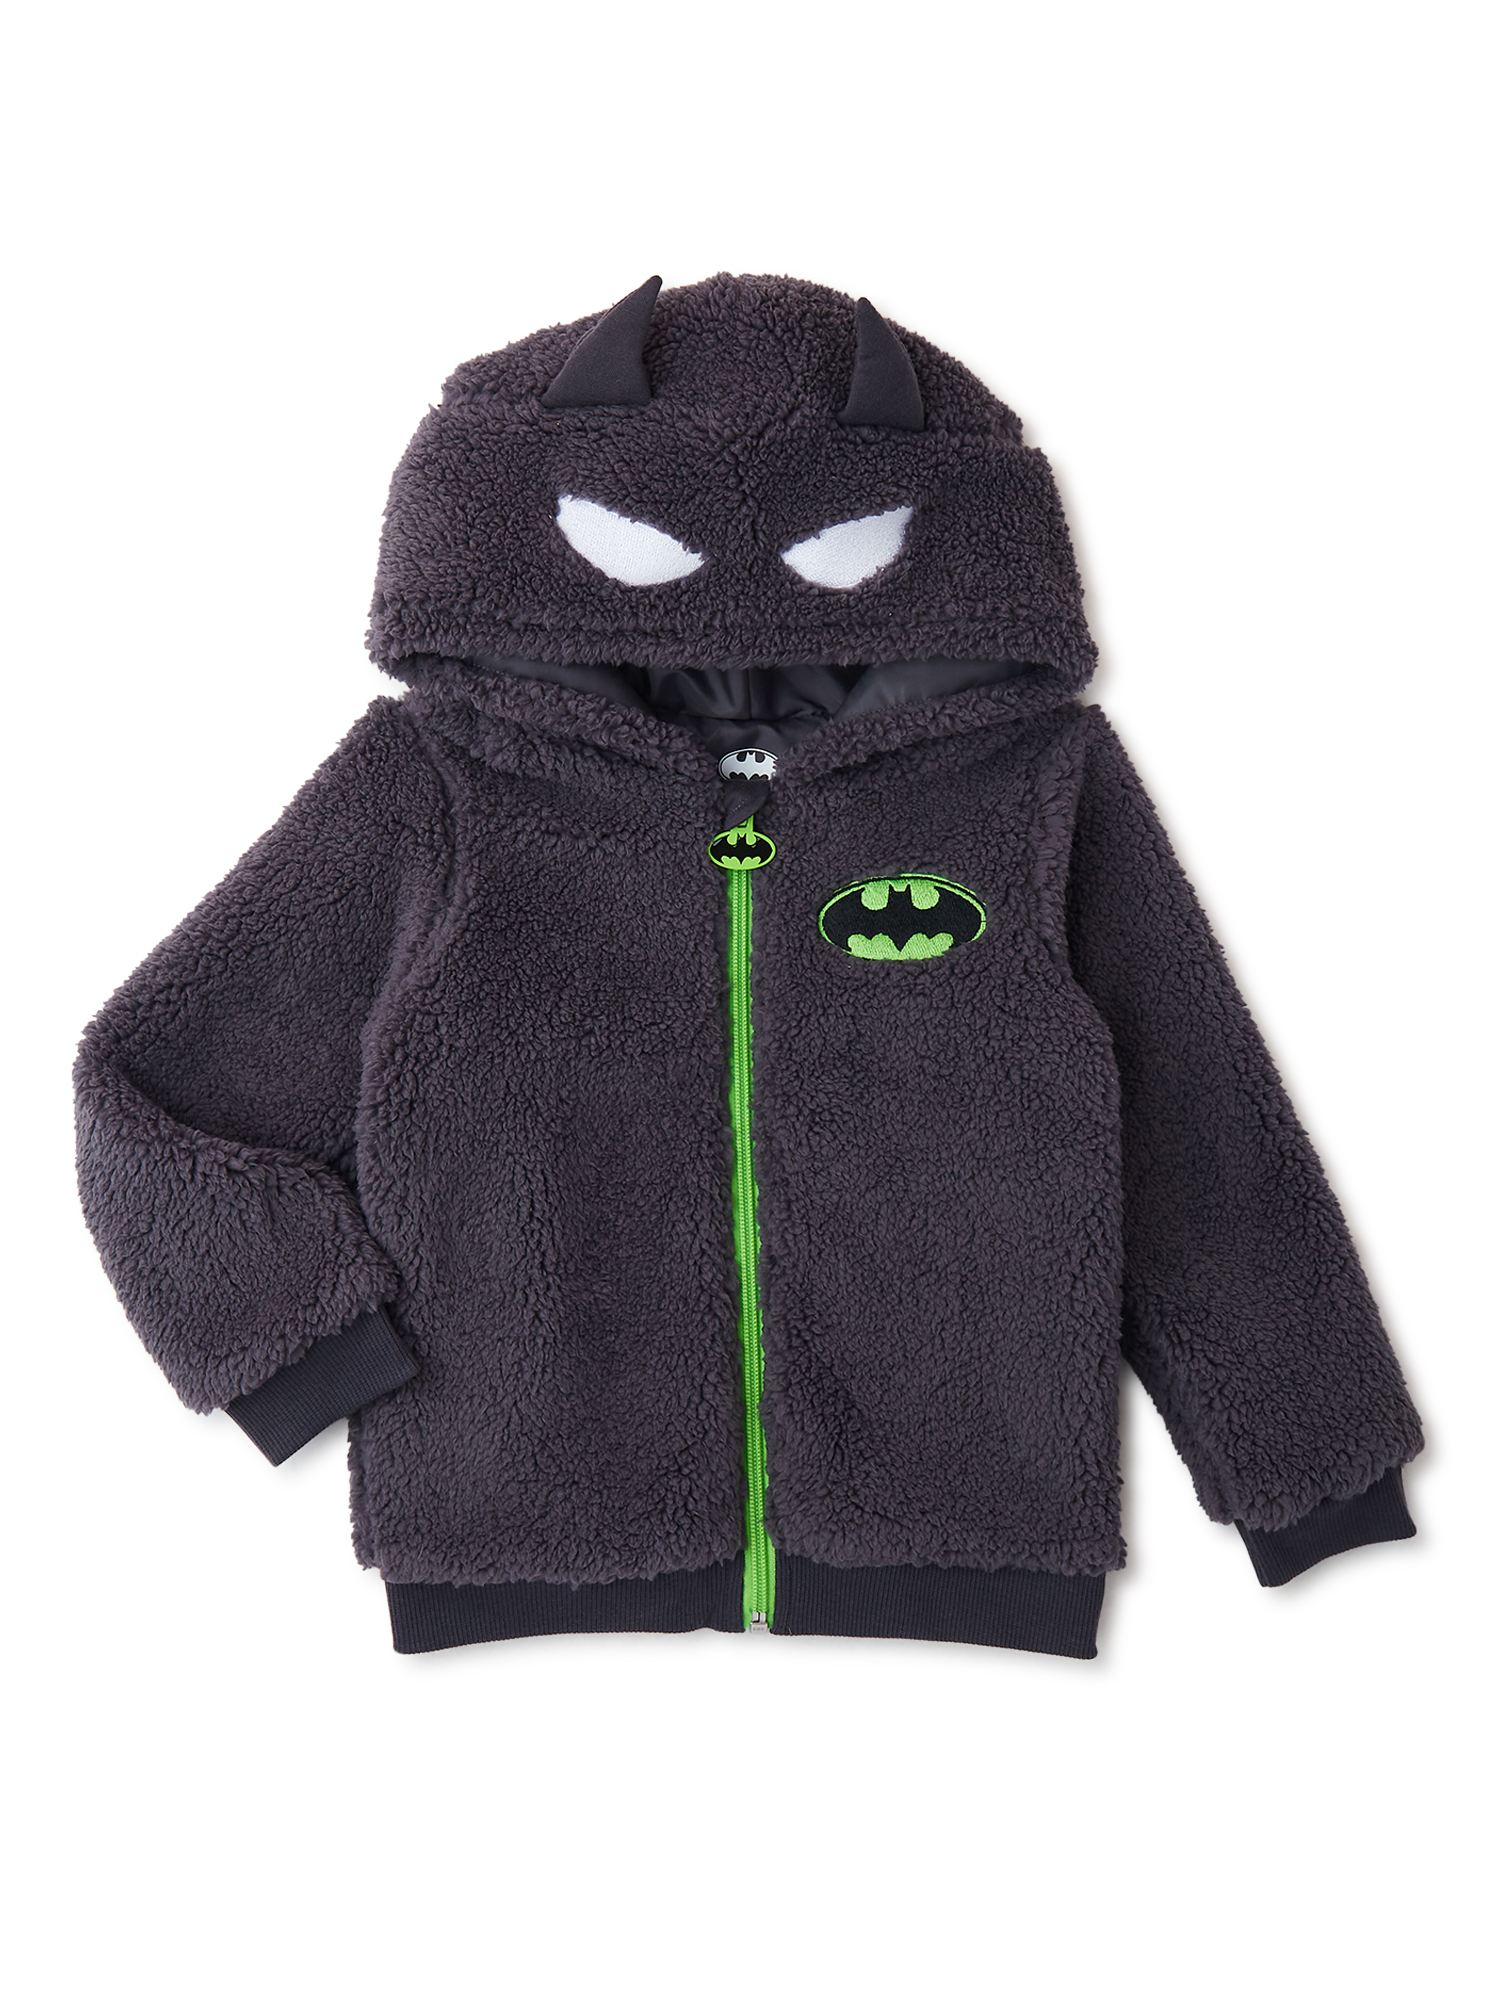 Batman Toddler Cosplay Faux Sherpa Hoodie, Sizes 12M-5T - image 1 of 6